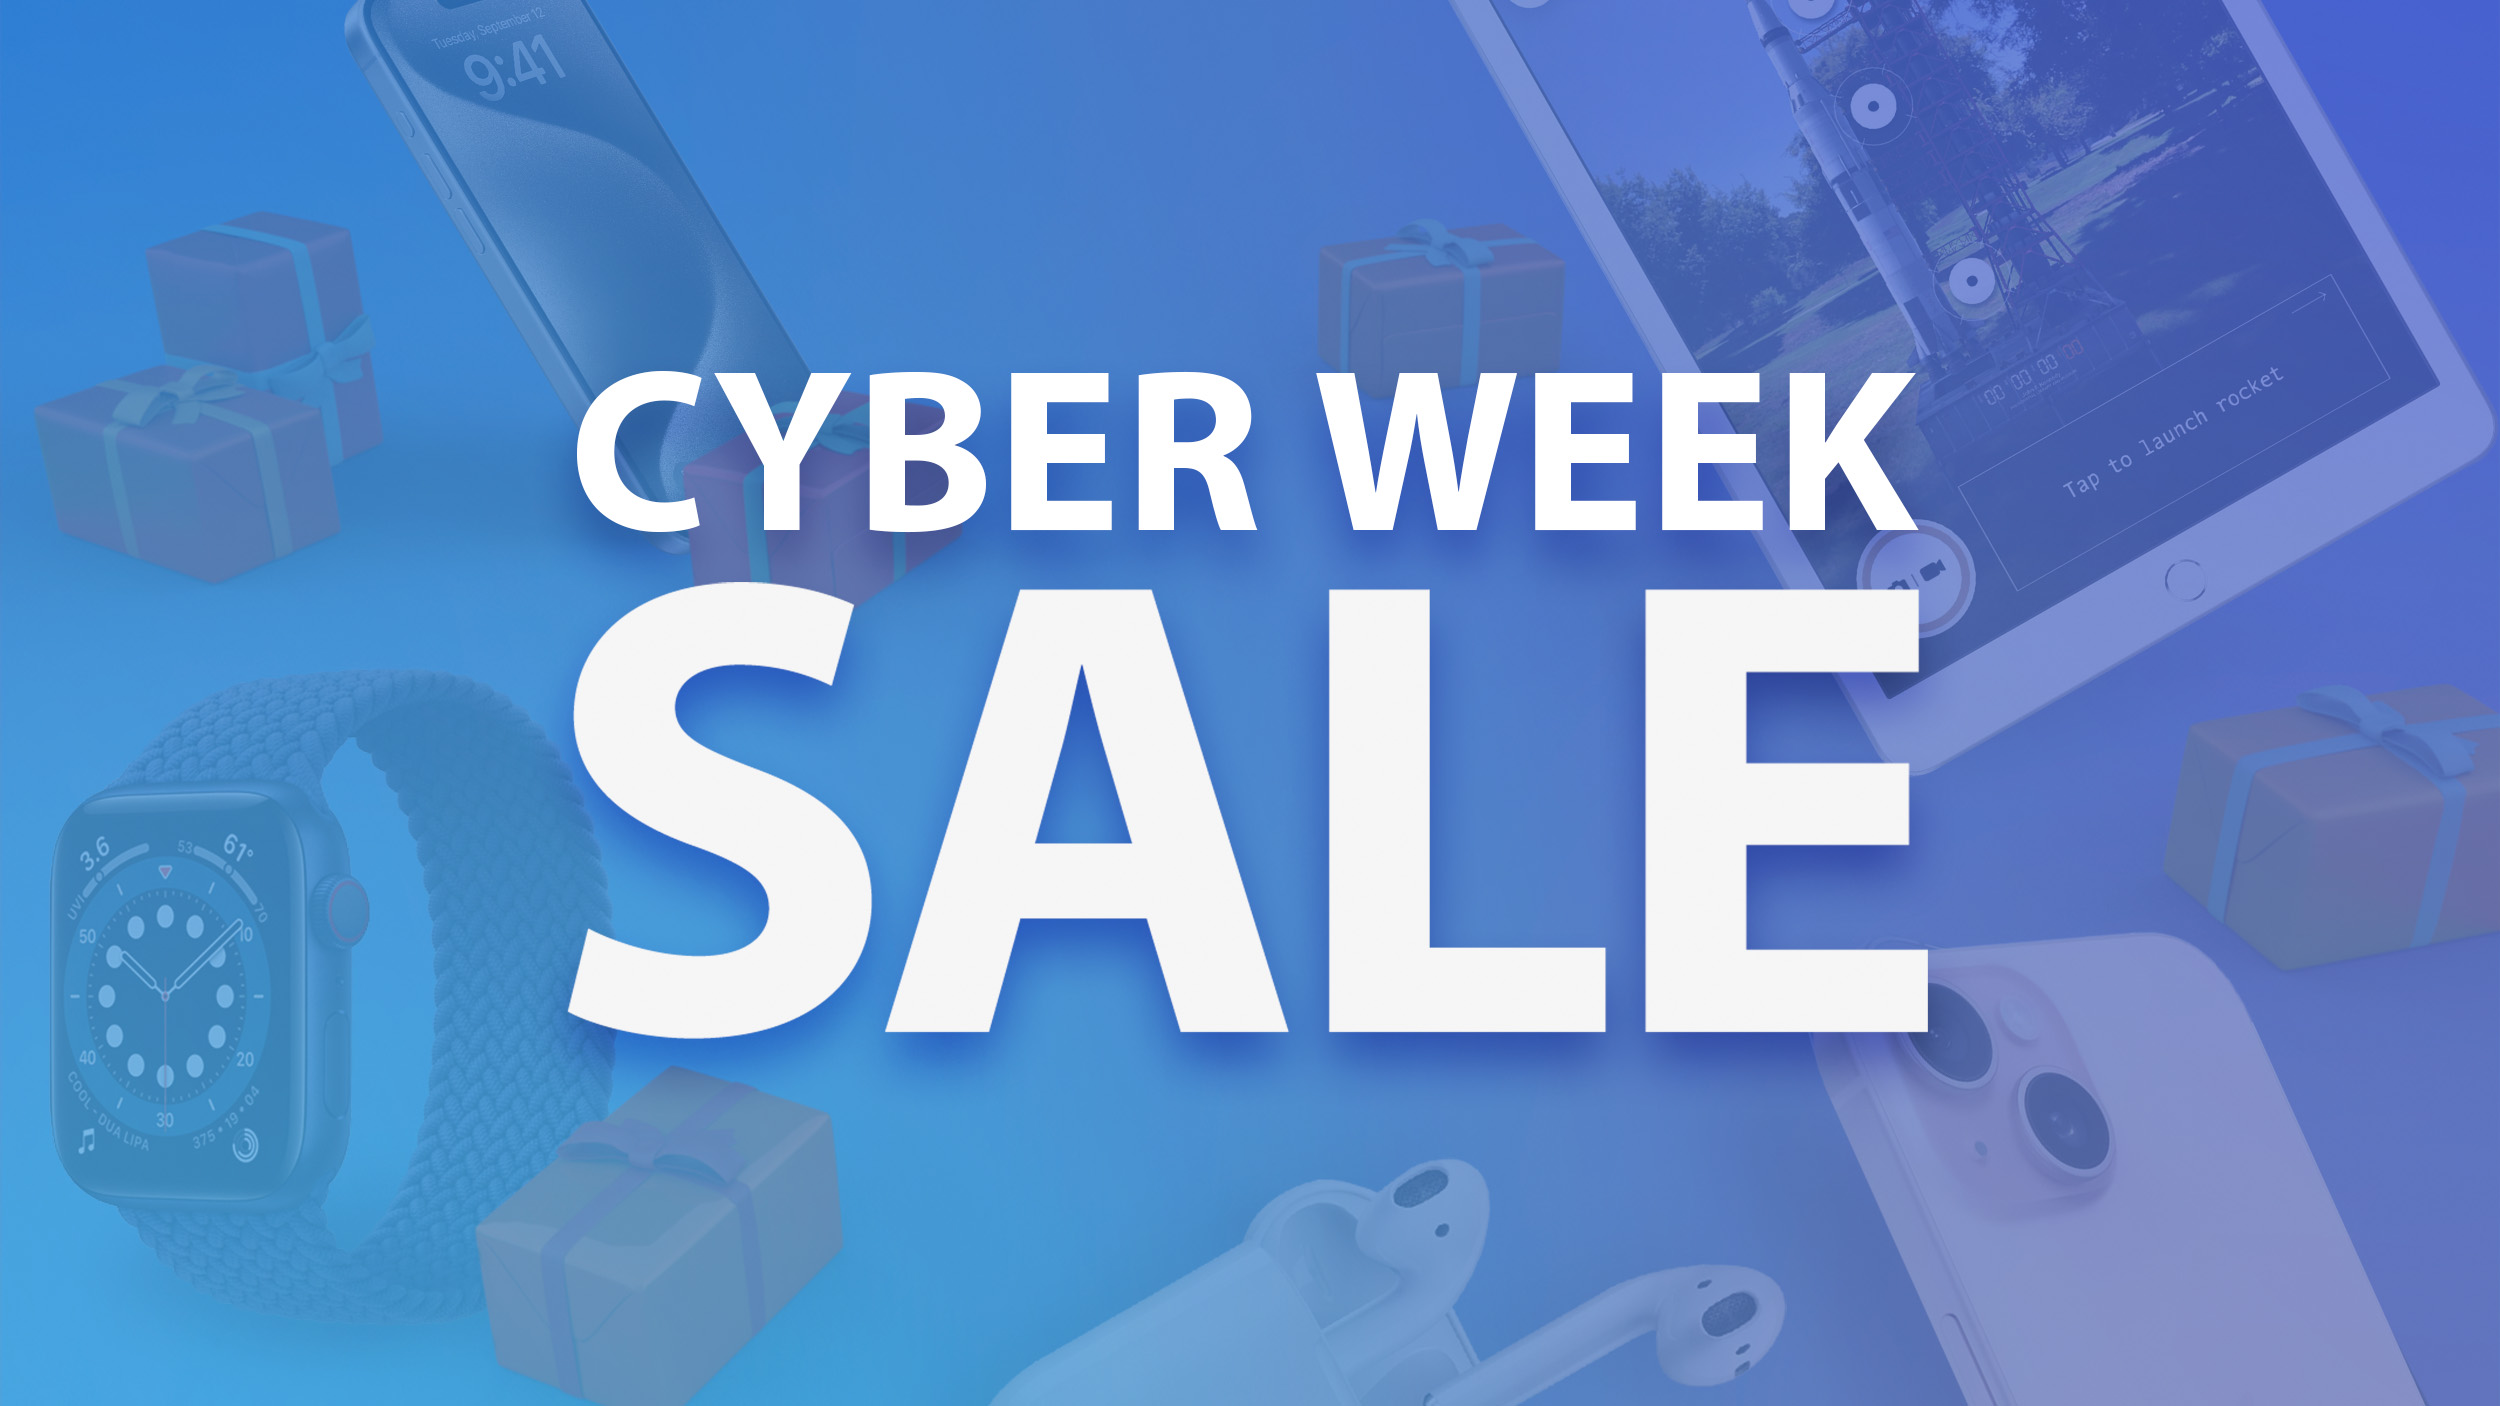 Cyber Week Deals Arrive for Popular Mac App Software Bundles and Streaming Services